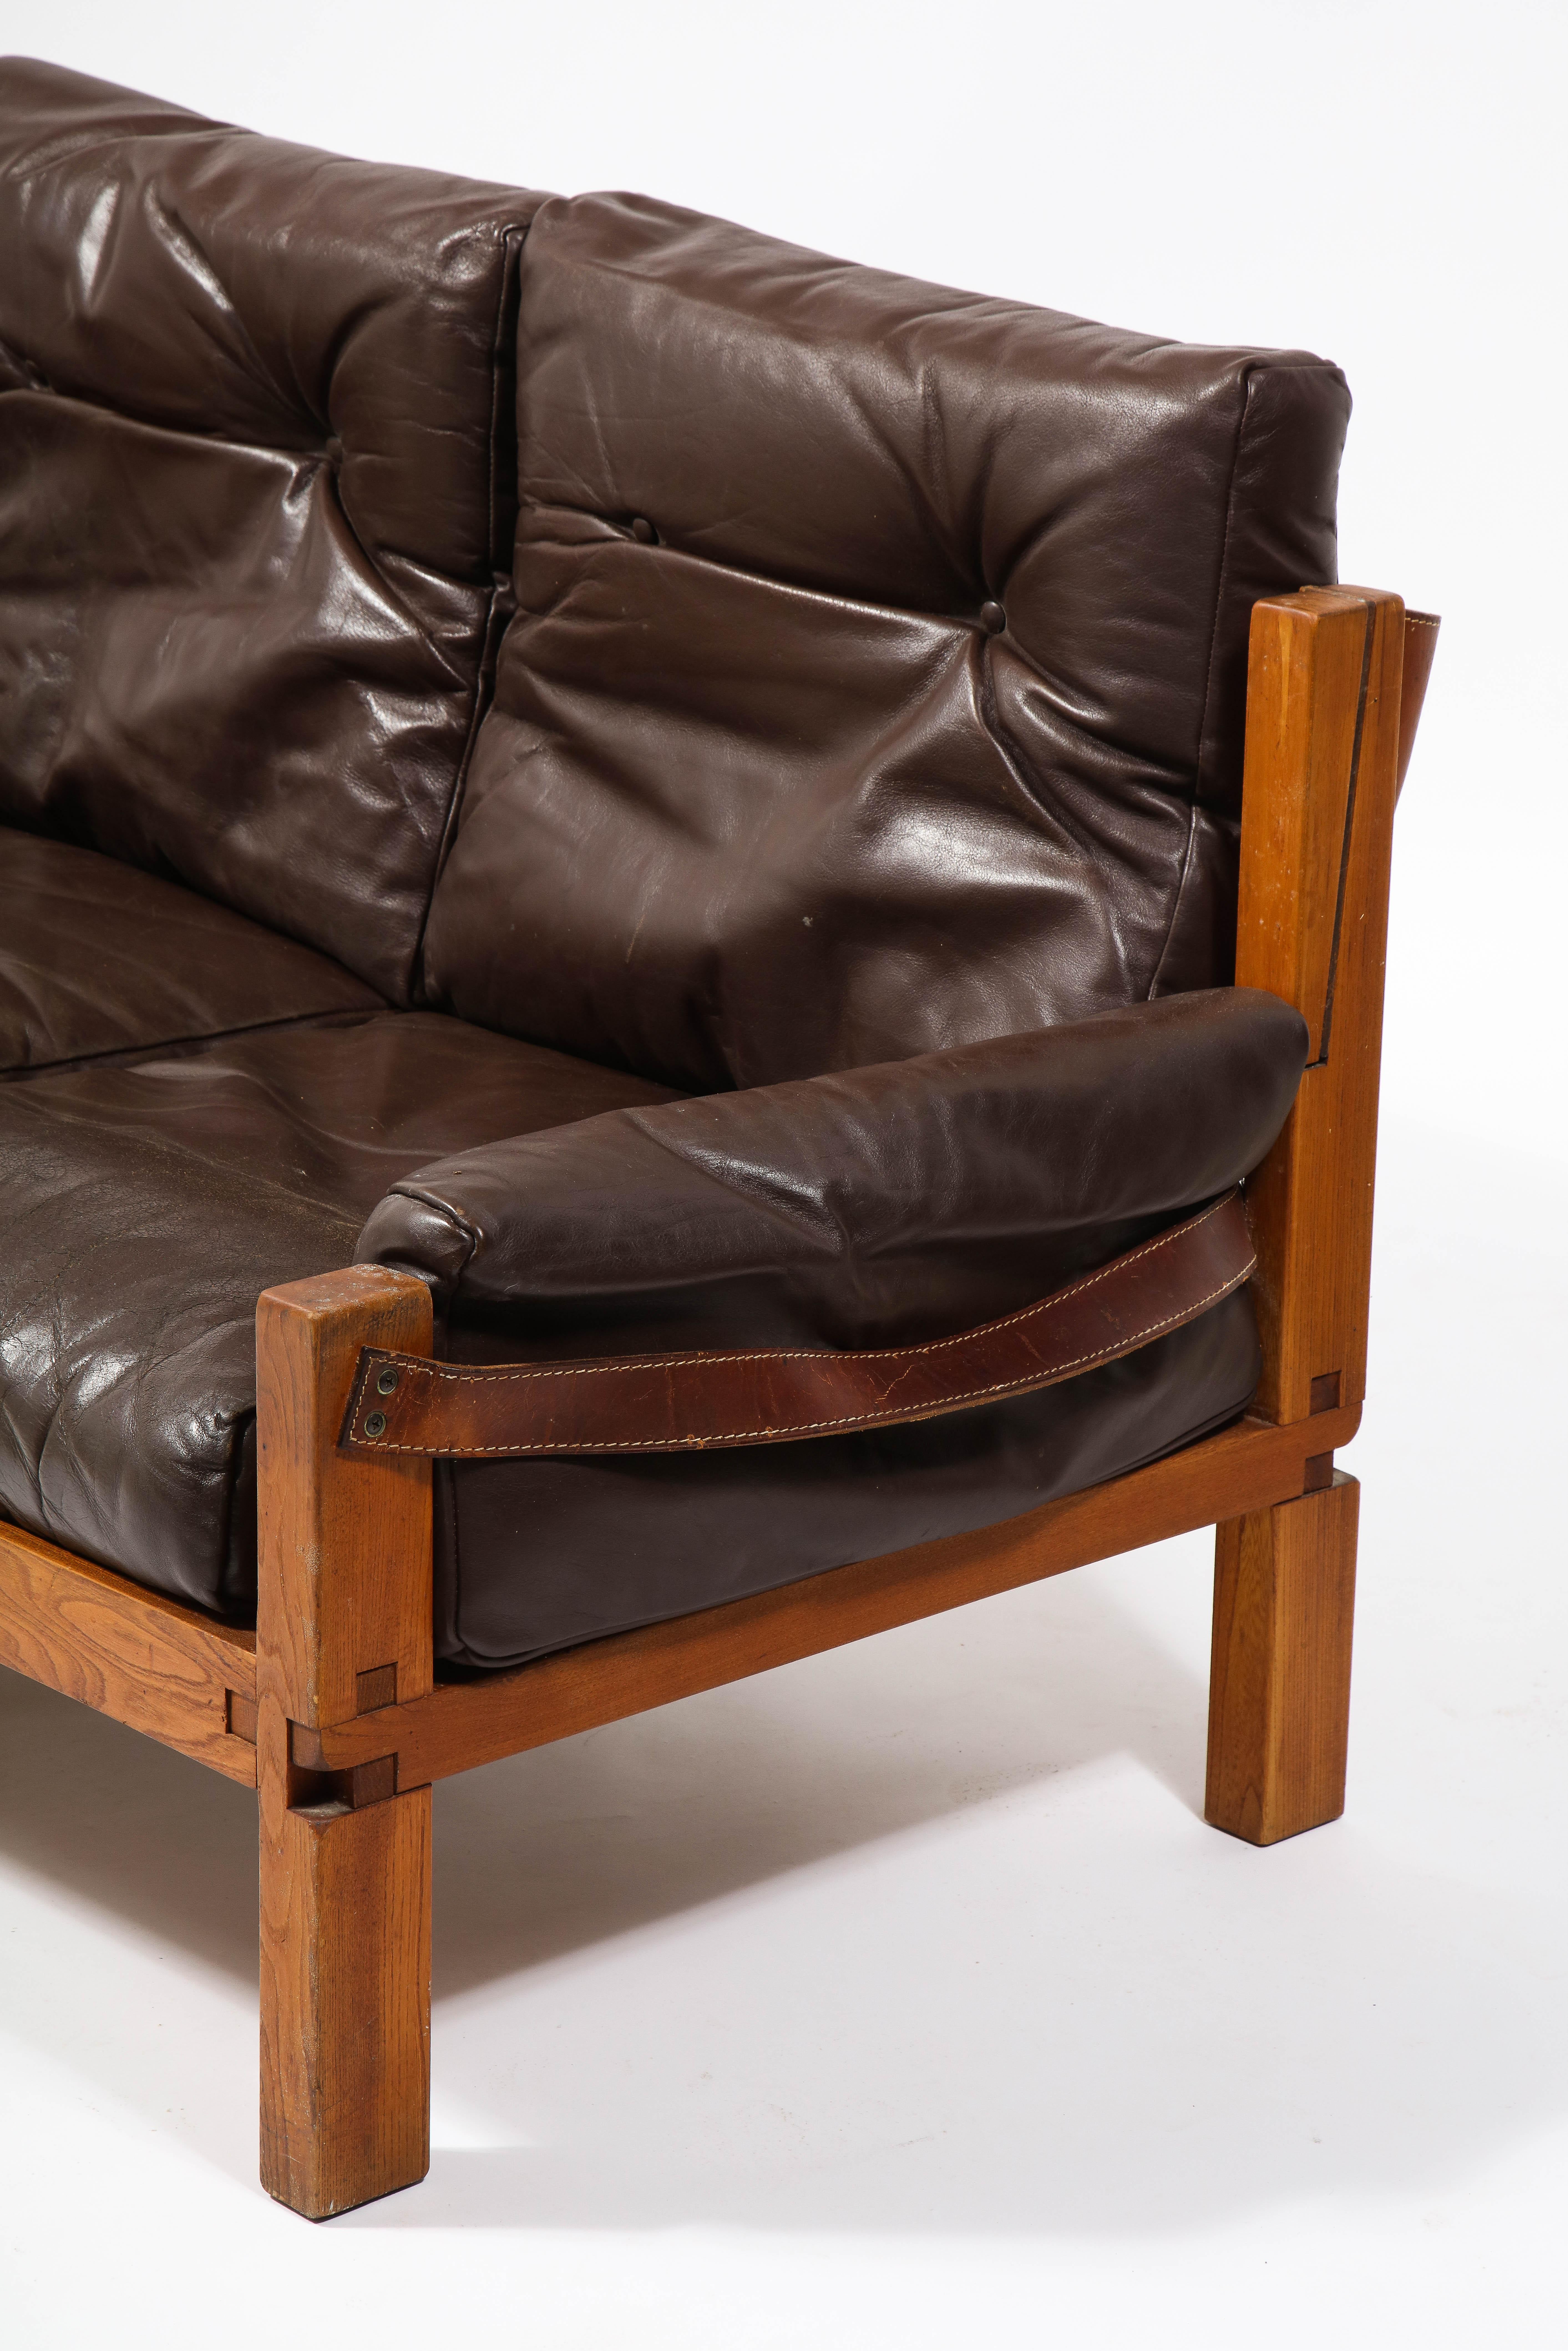 20th Century Pierre Chapo Leather & Elm Model S22R Three-Seater Sofa, France 1960's For Sale